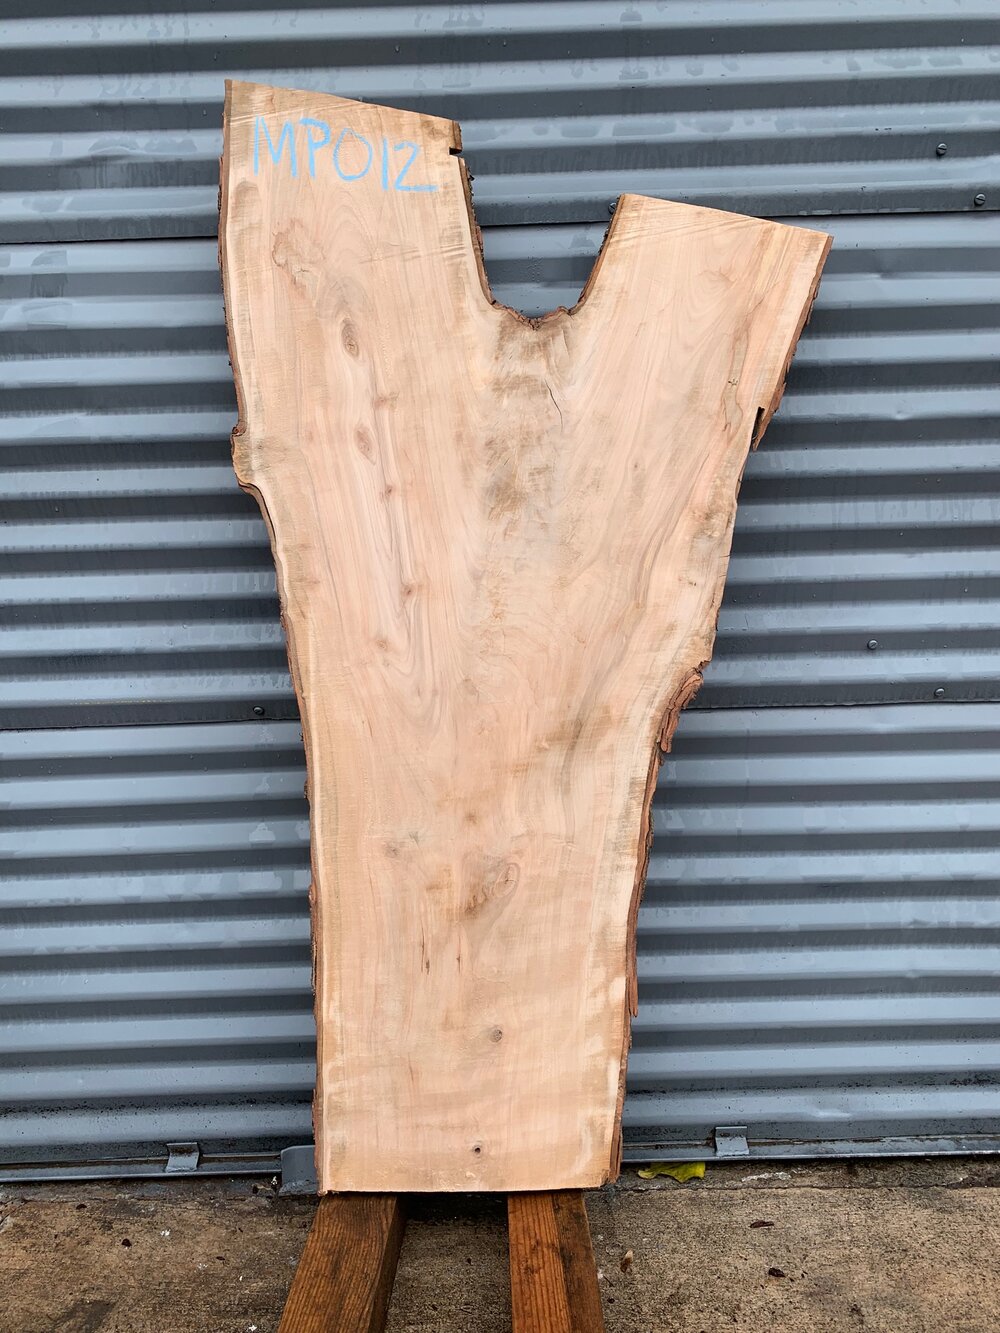 Silver Maple Natural Edge Slab #6-25-20-01 - Wood From The Hood